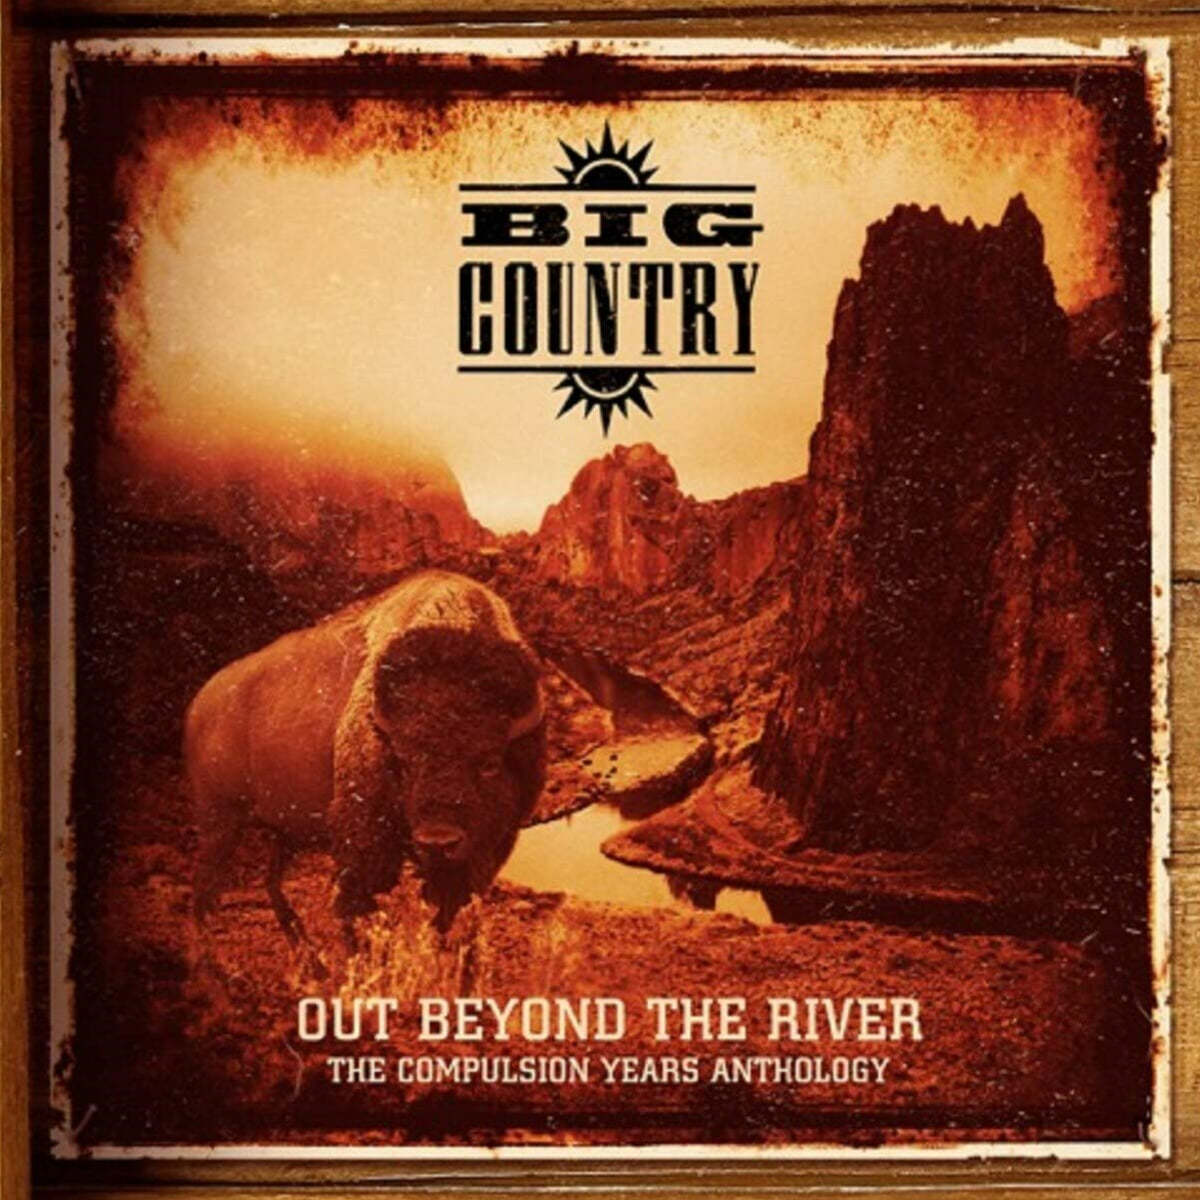 Big Country (빅 컨트리) - Out Beyond The River: The Compulsion Years Anthology